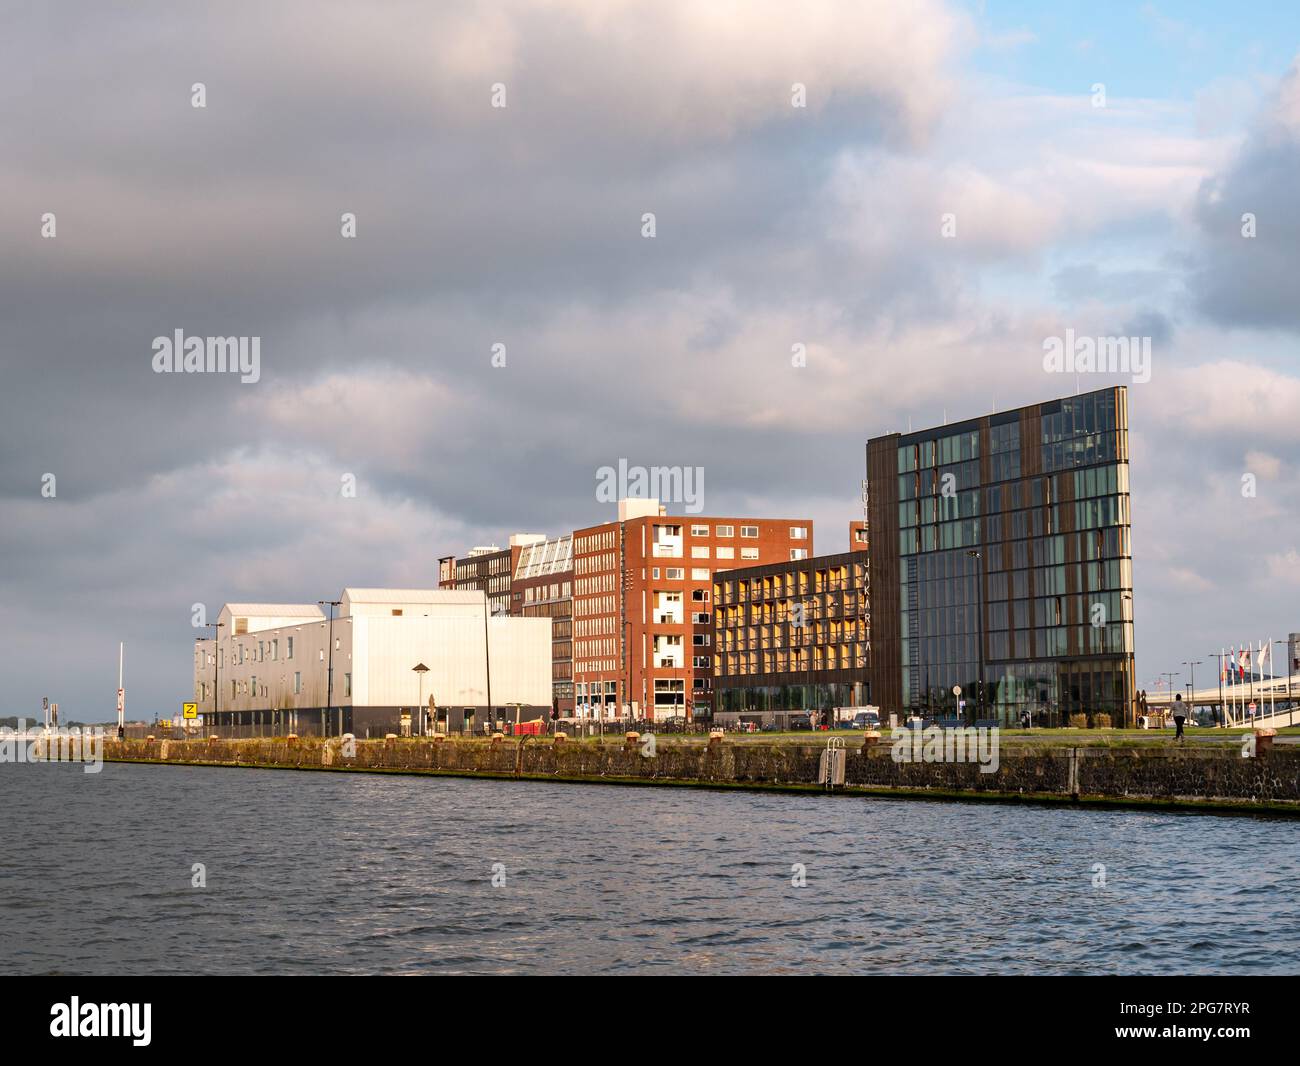 Hotel Jakarta and residential buildings on Java Island peninsula in eastern docklands of Amsterdam, Netherlands Stock Photo